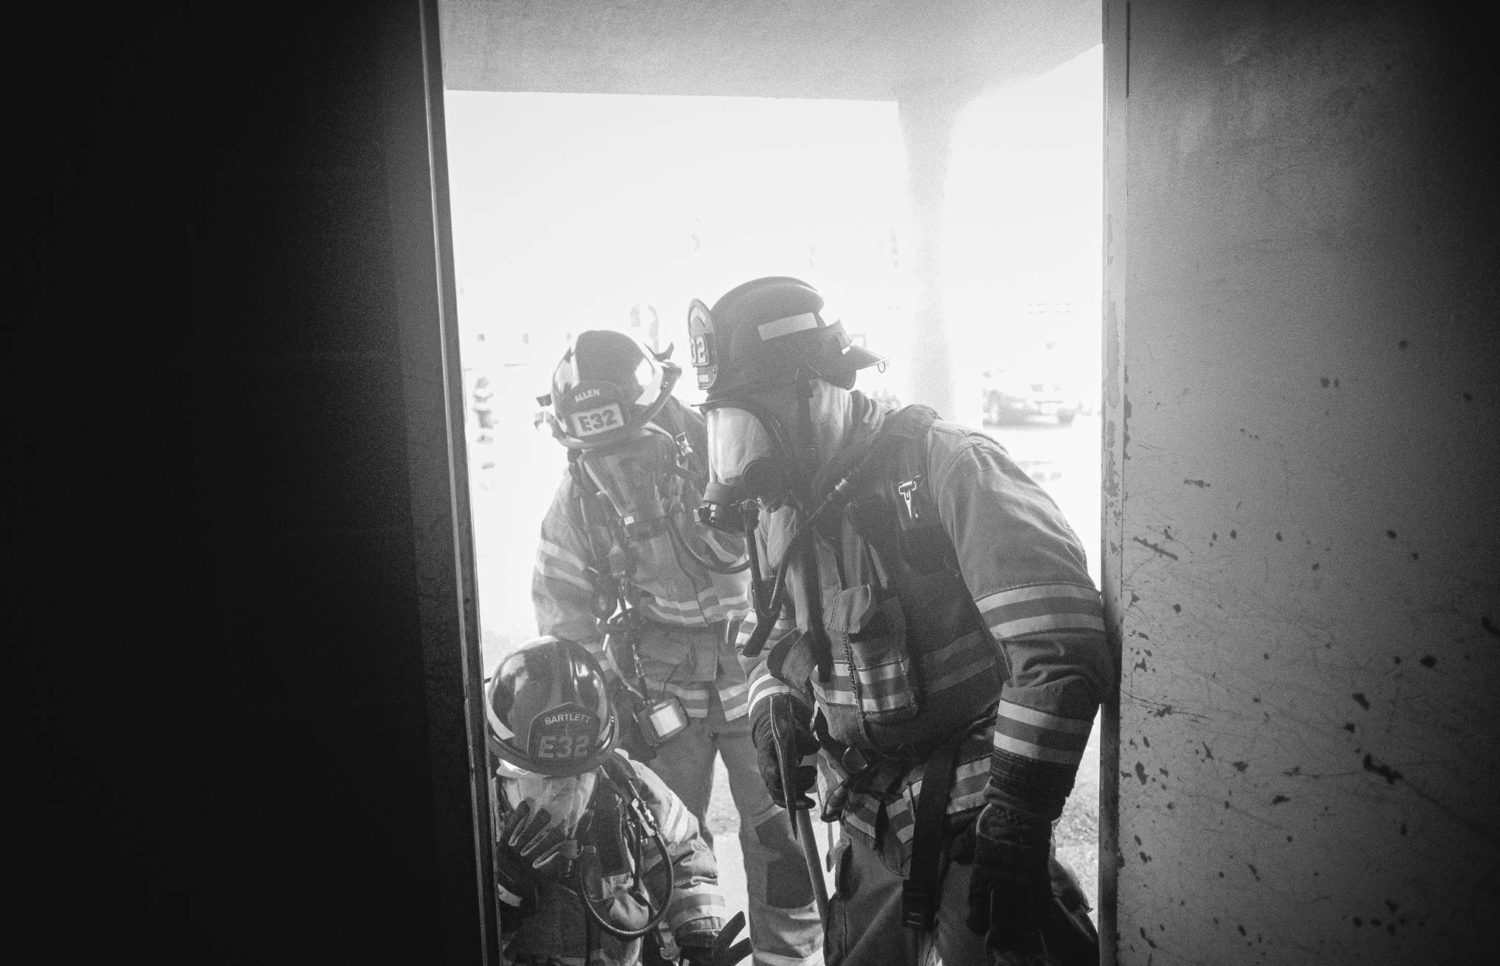 Firefighters from the fire department, standing in a doorway, ready to provide their service.